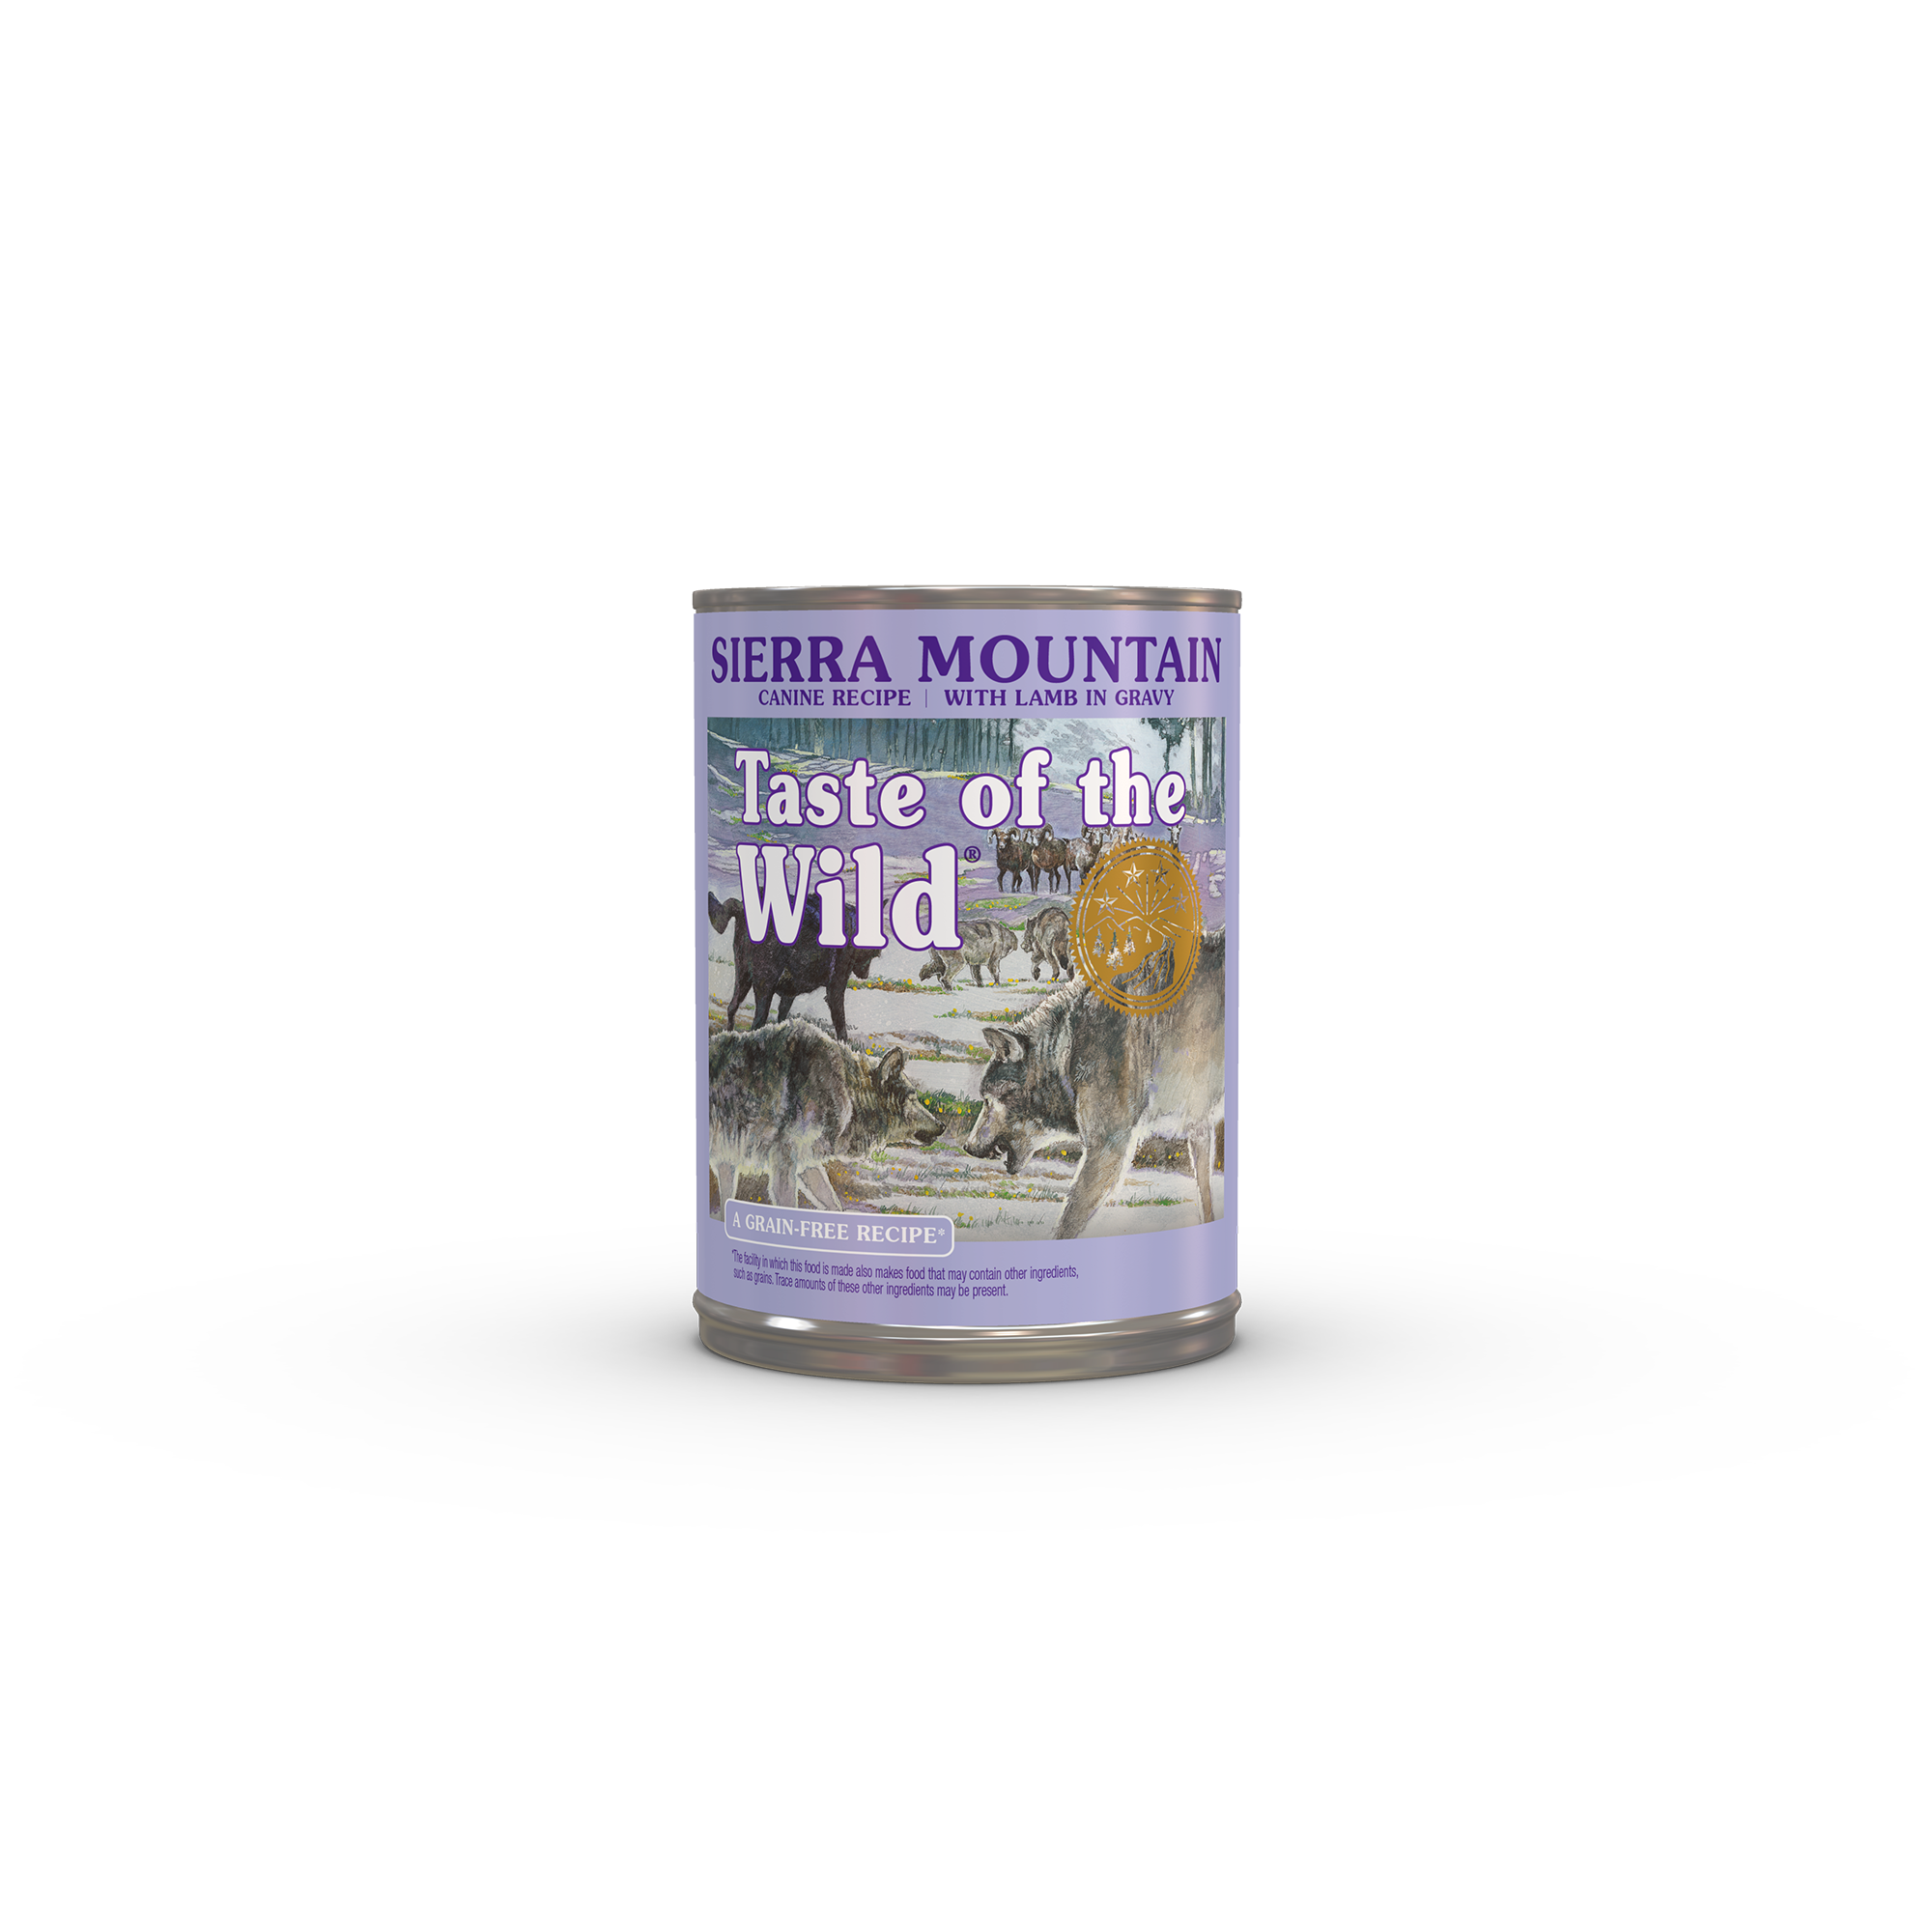 Taste of the Wild Grain-Free Canned Sierra Mountain Canine Recipe with Lamb in Gravy package